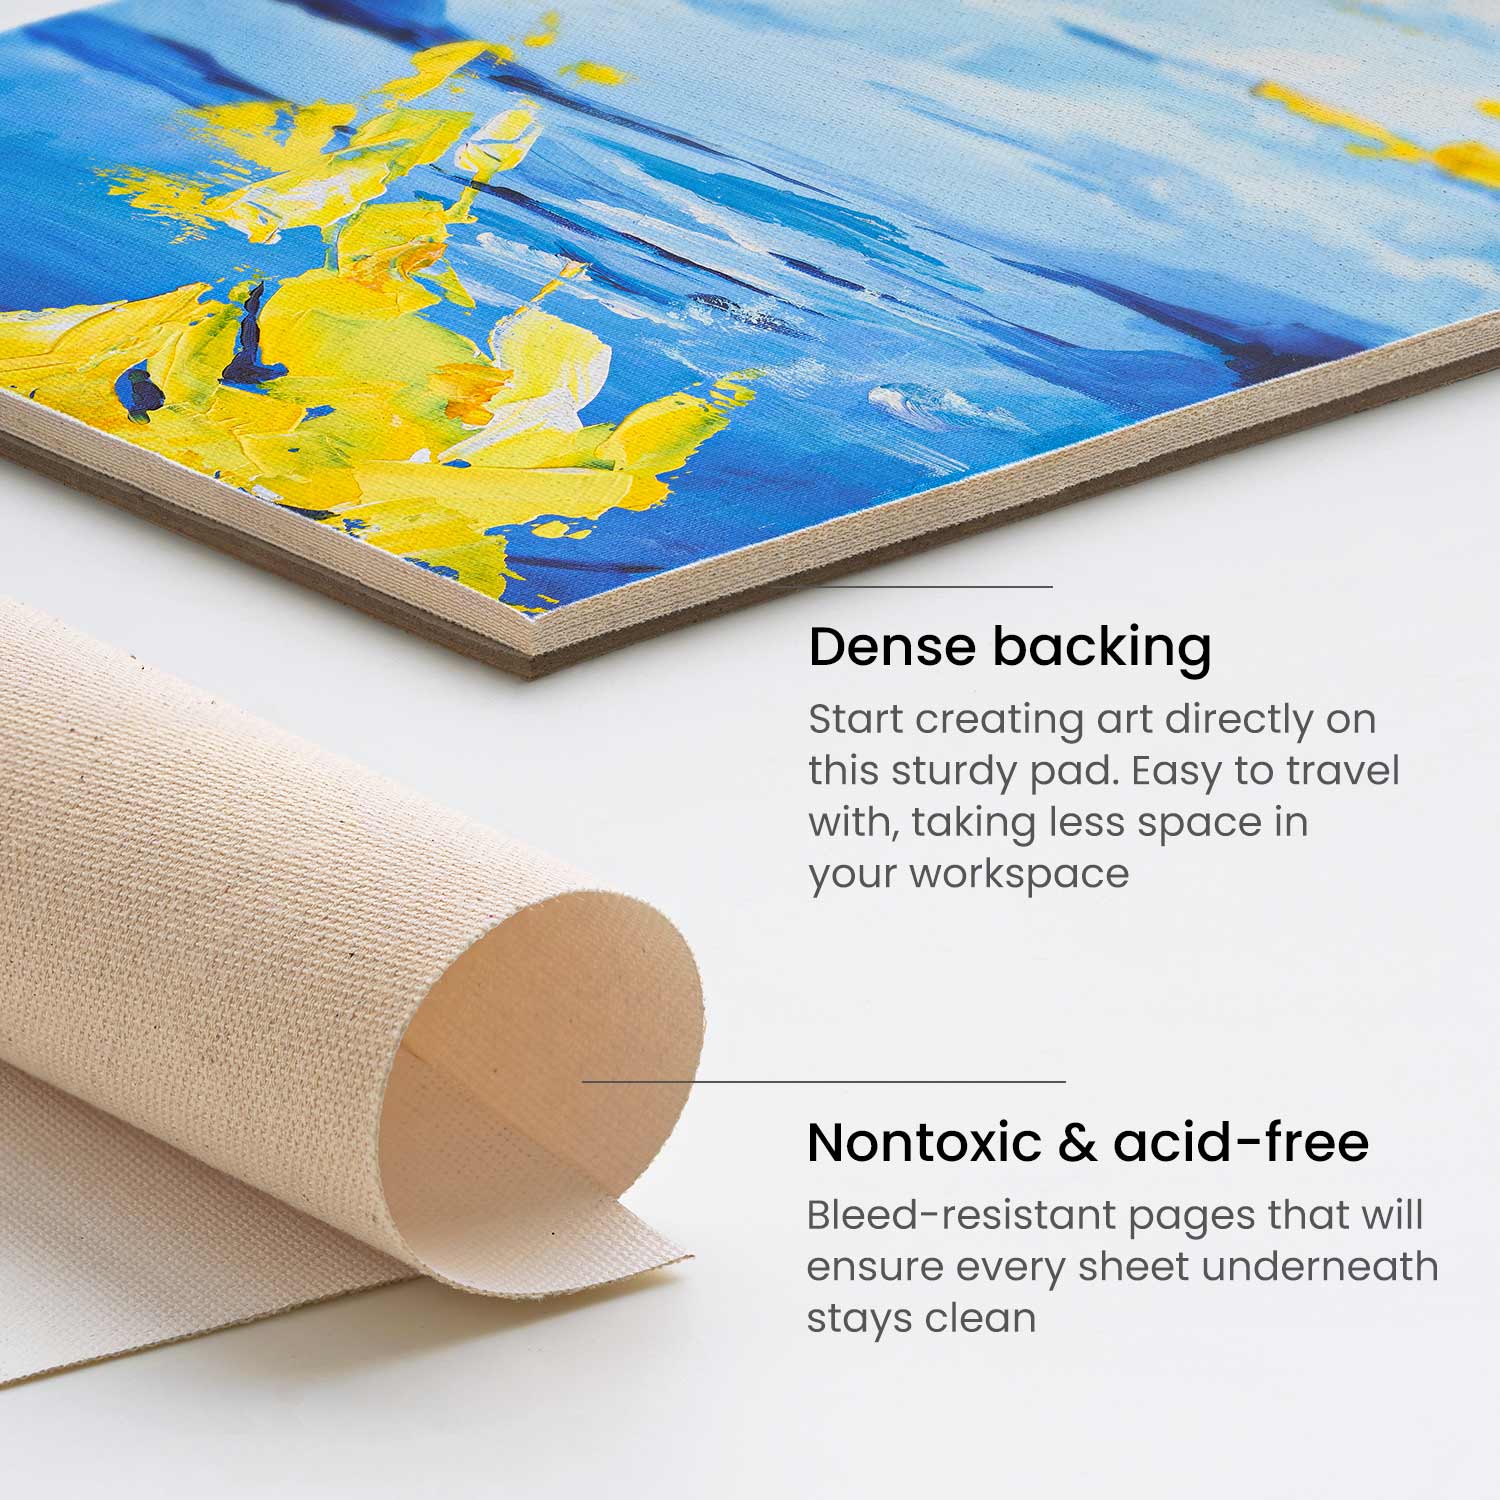 How Sturdy the 2 Pack of Arteza Canvas Pad